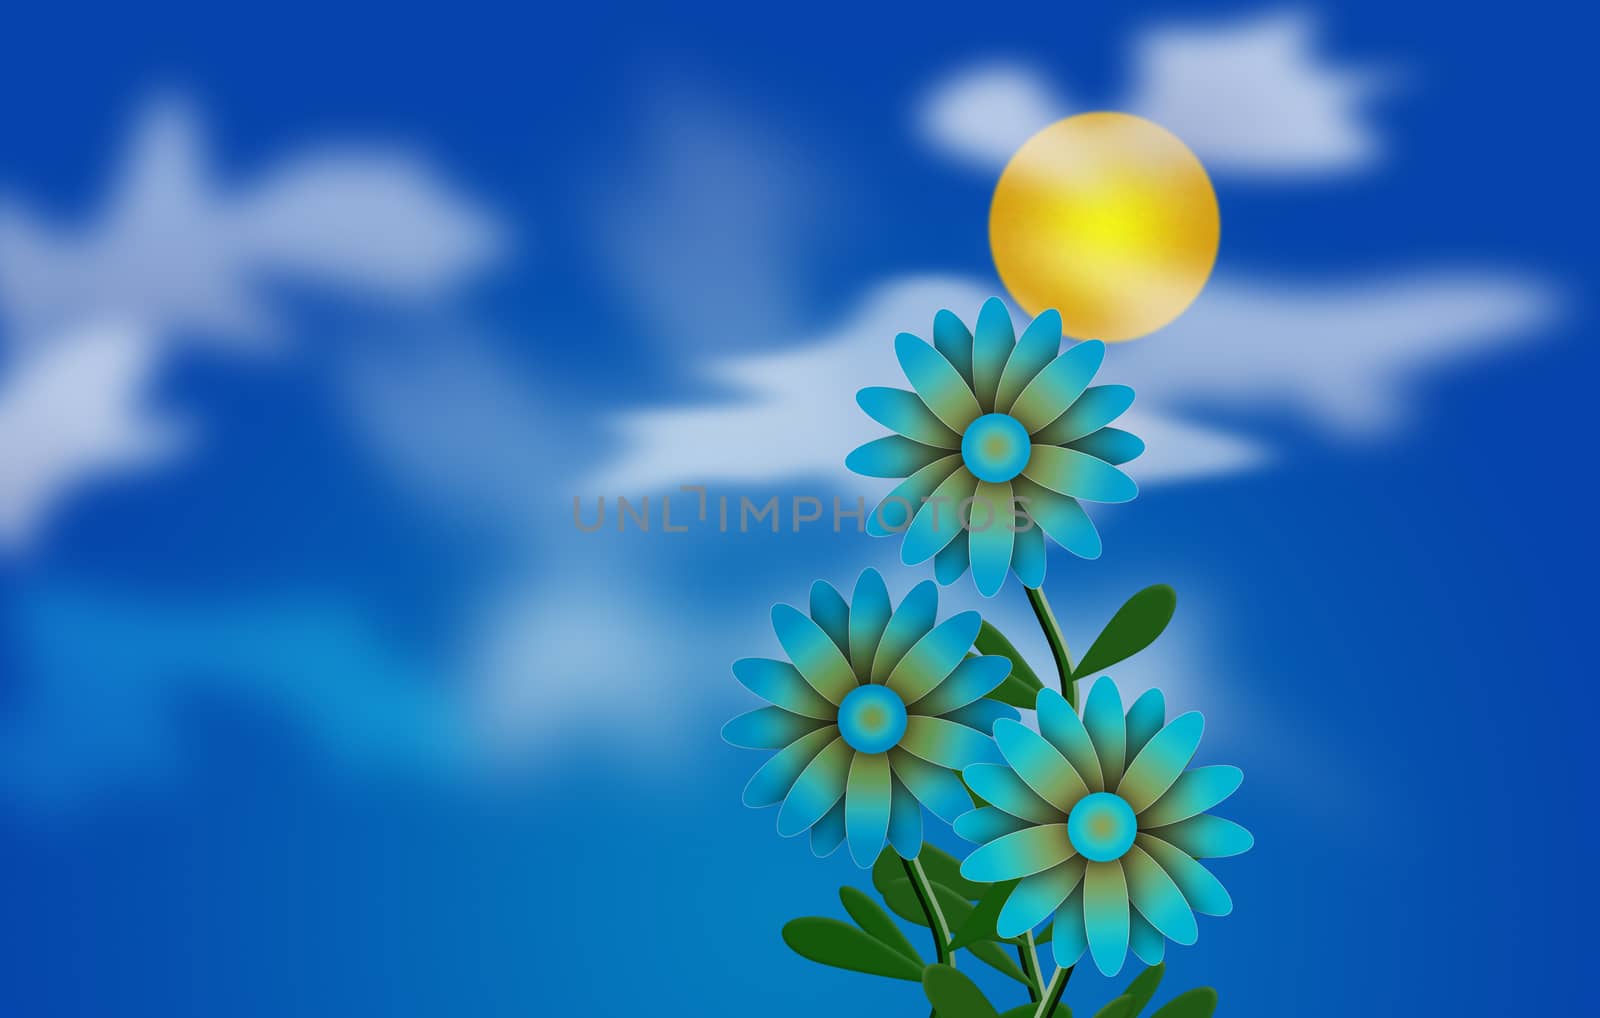 Daisies by applesstock